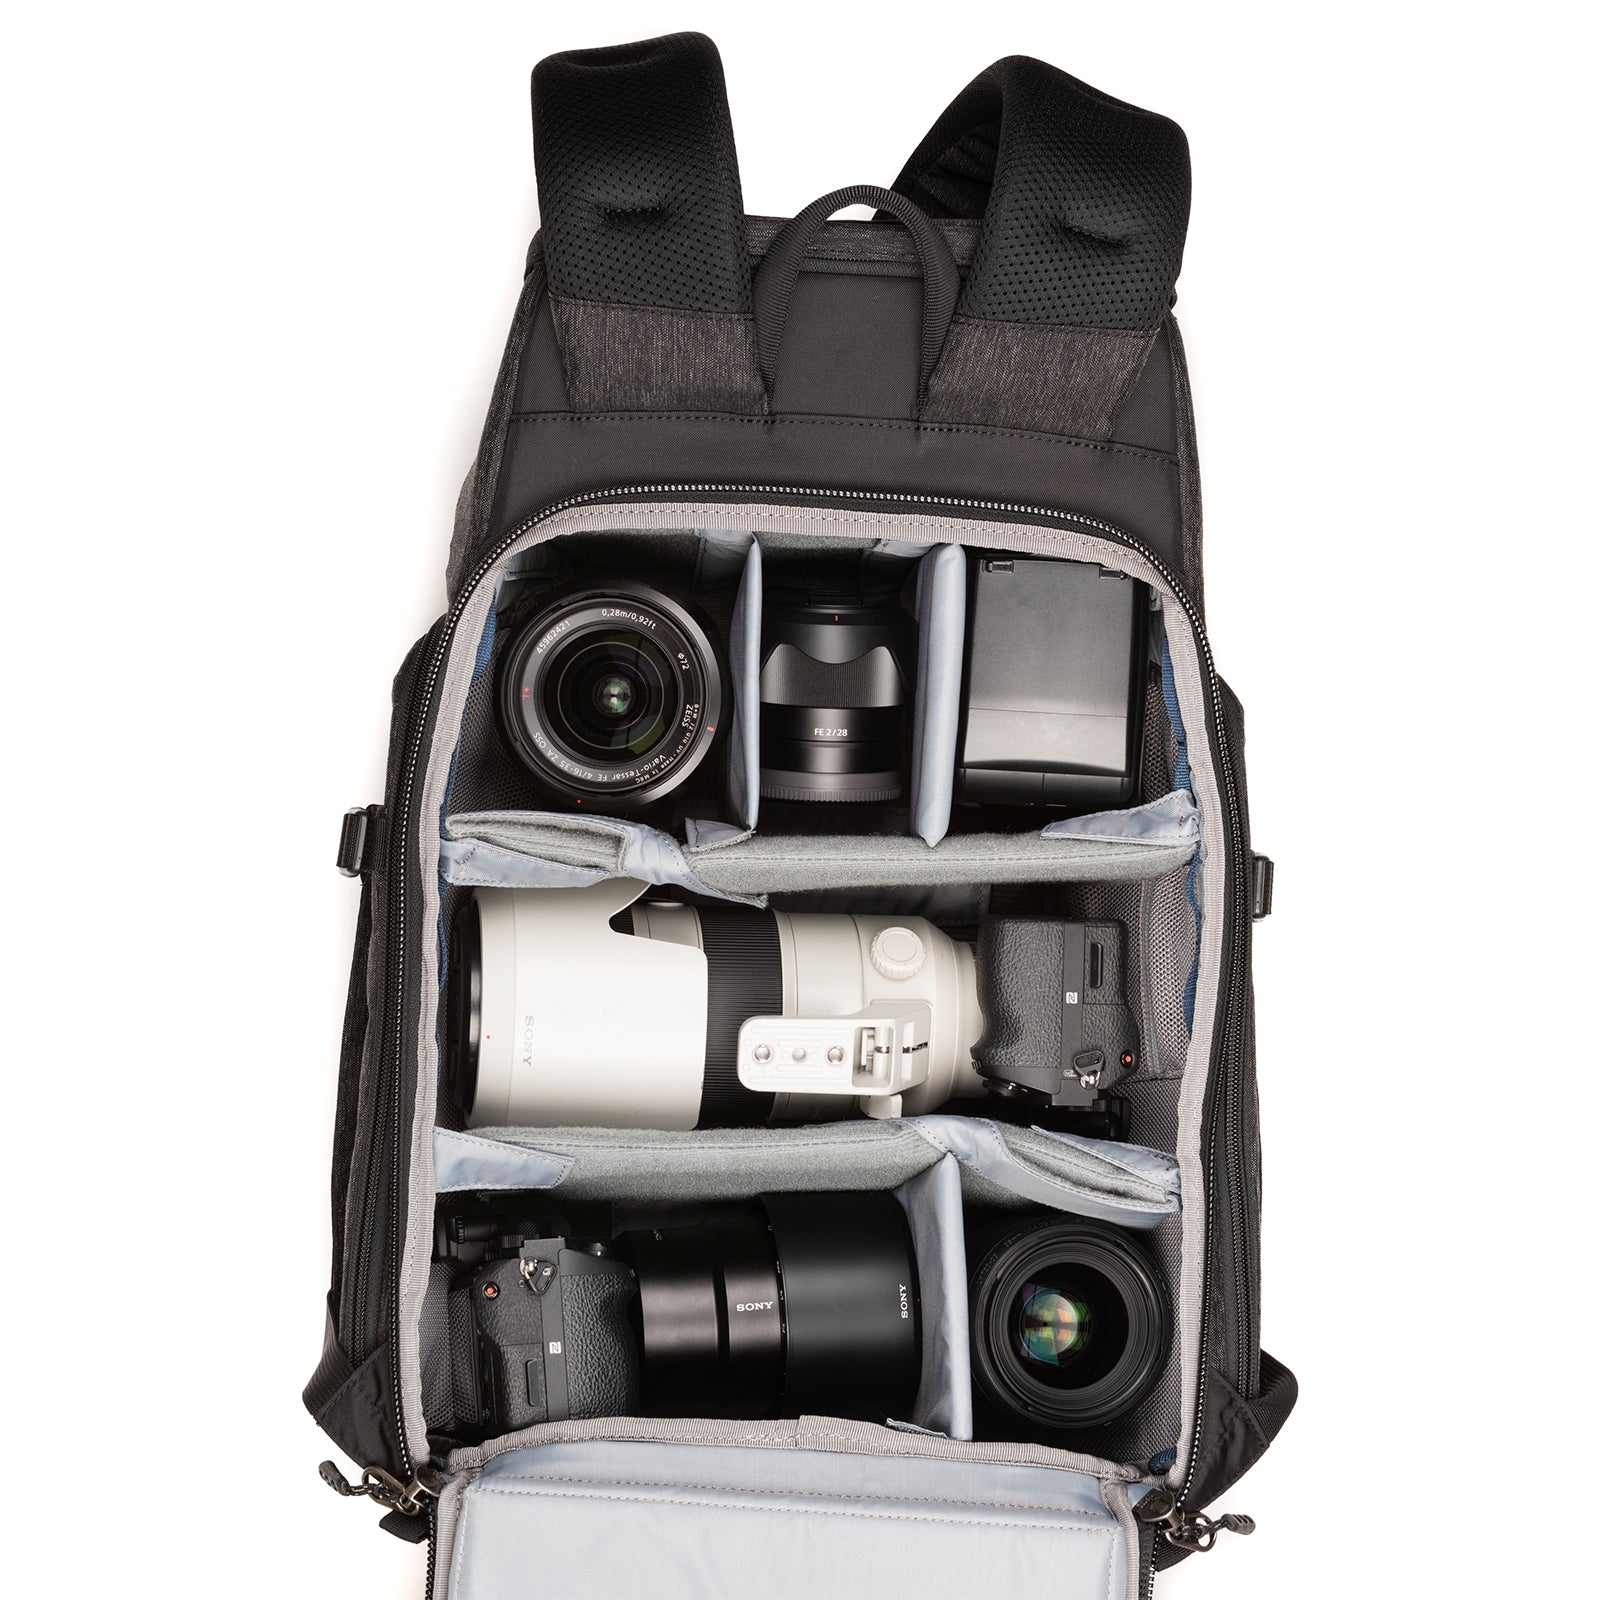 Urban Access 15 Camera Backpack for DSLR or Mirrorless fits 15